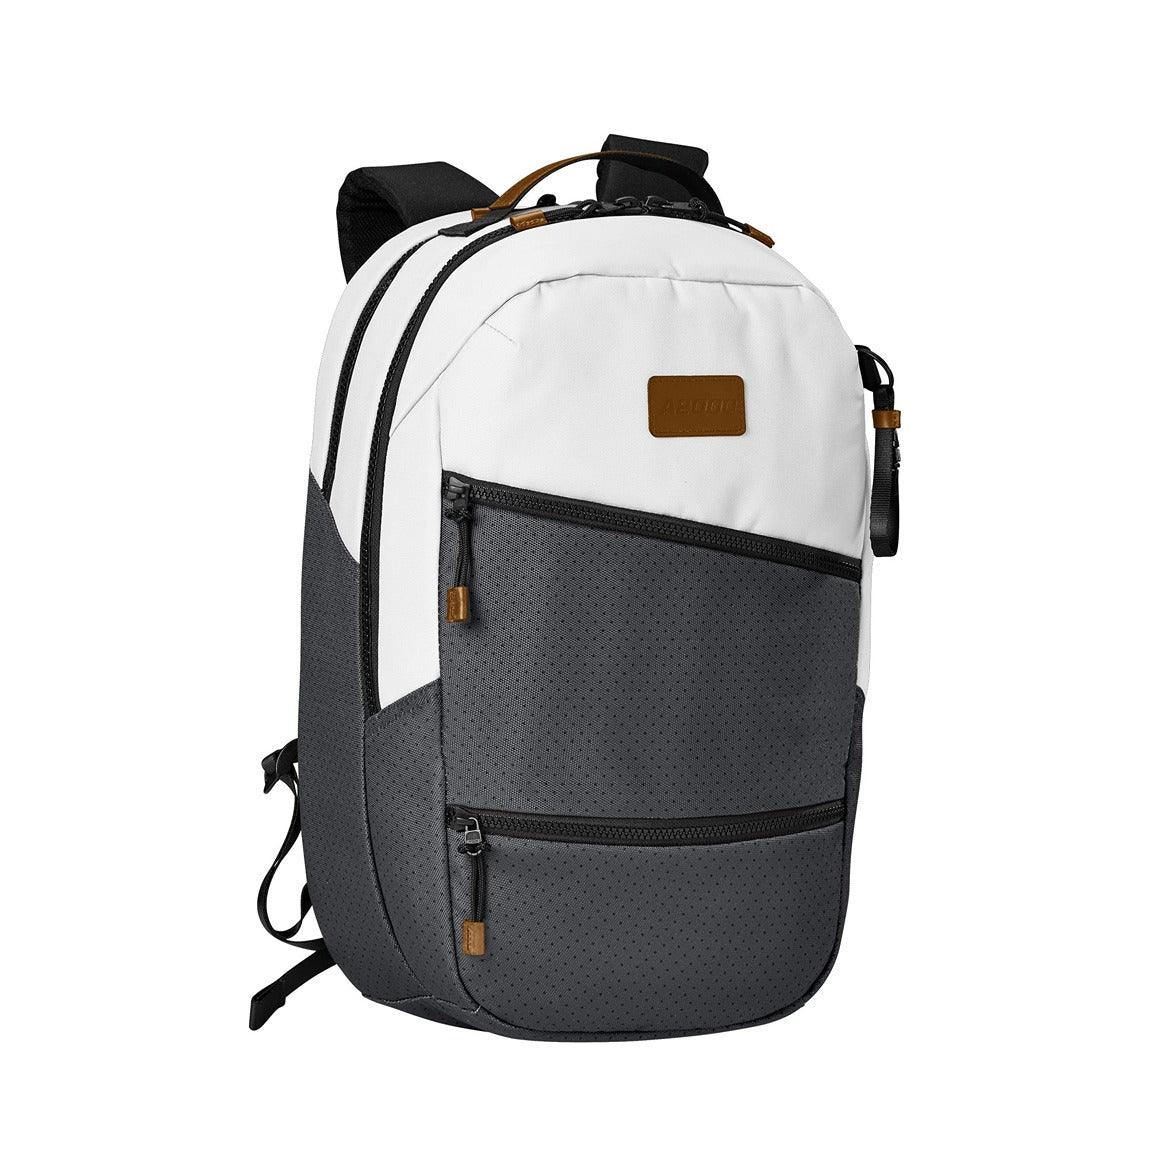 Wilson A2000 Lifestyle Backpack